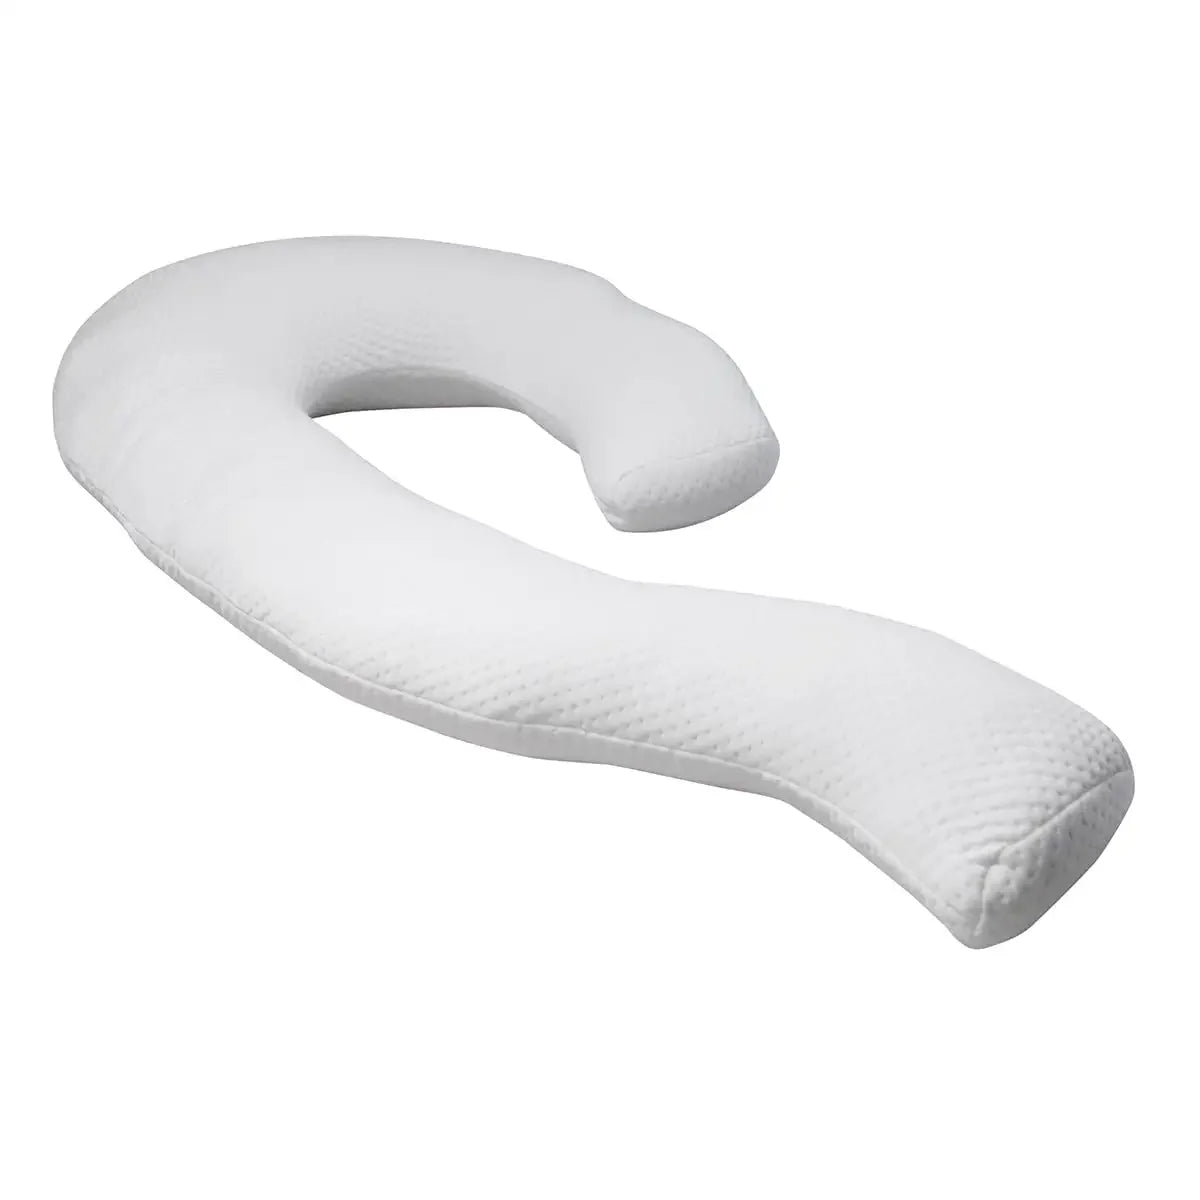 Cloud Discoveries Contour Swan Body Pillow - Knitted Fabric Soft Pregnancy Pillow with Removable Cover